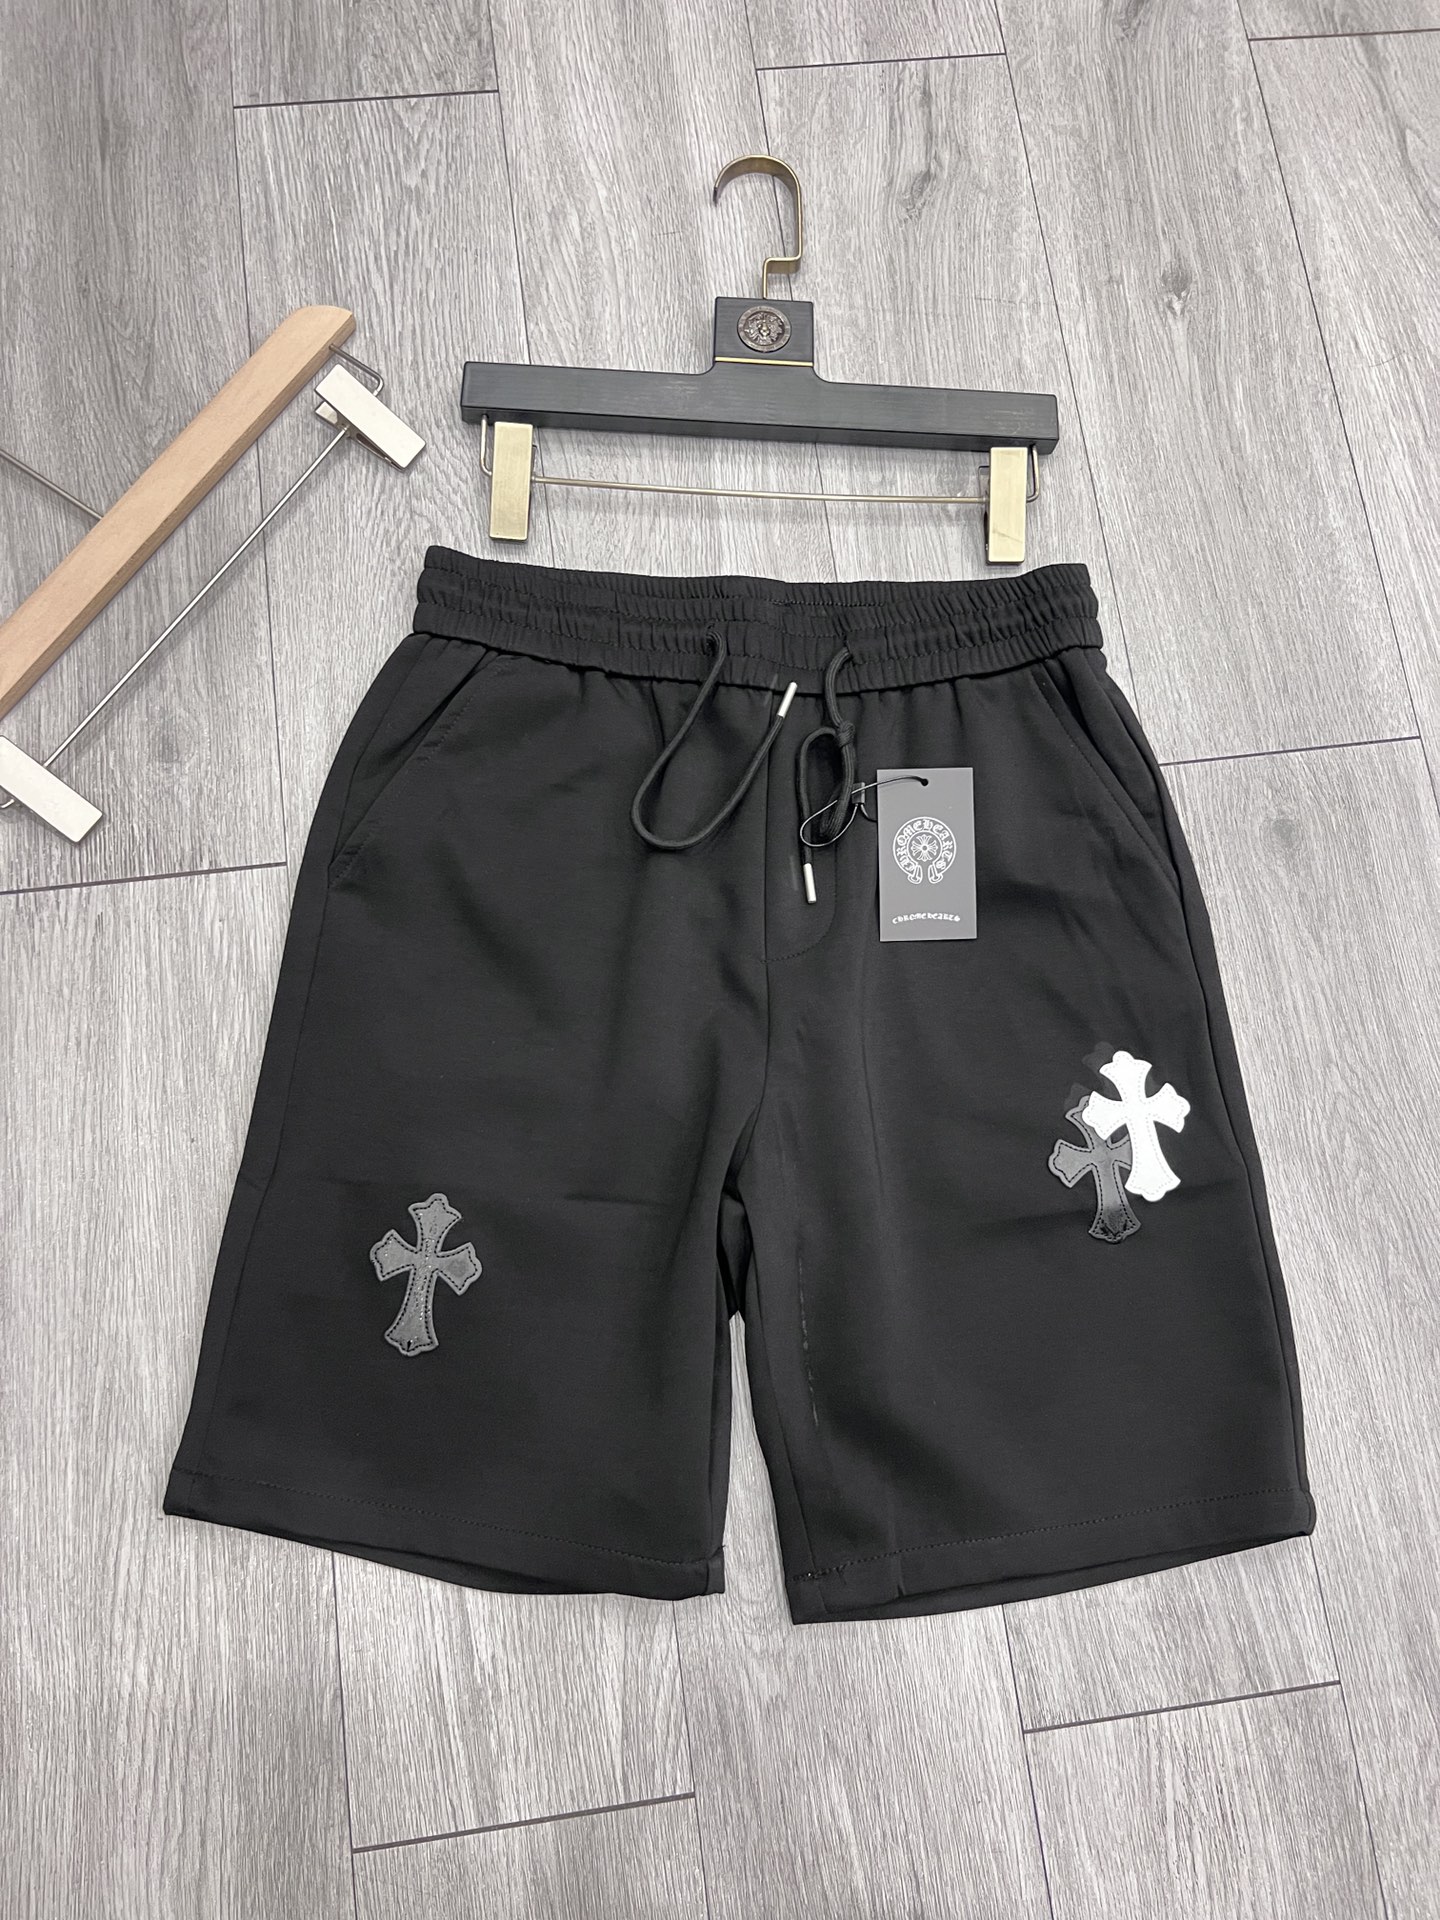 Chrome Hearts Clothing Shorts Black Printing Summer Collection Casual